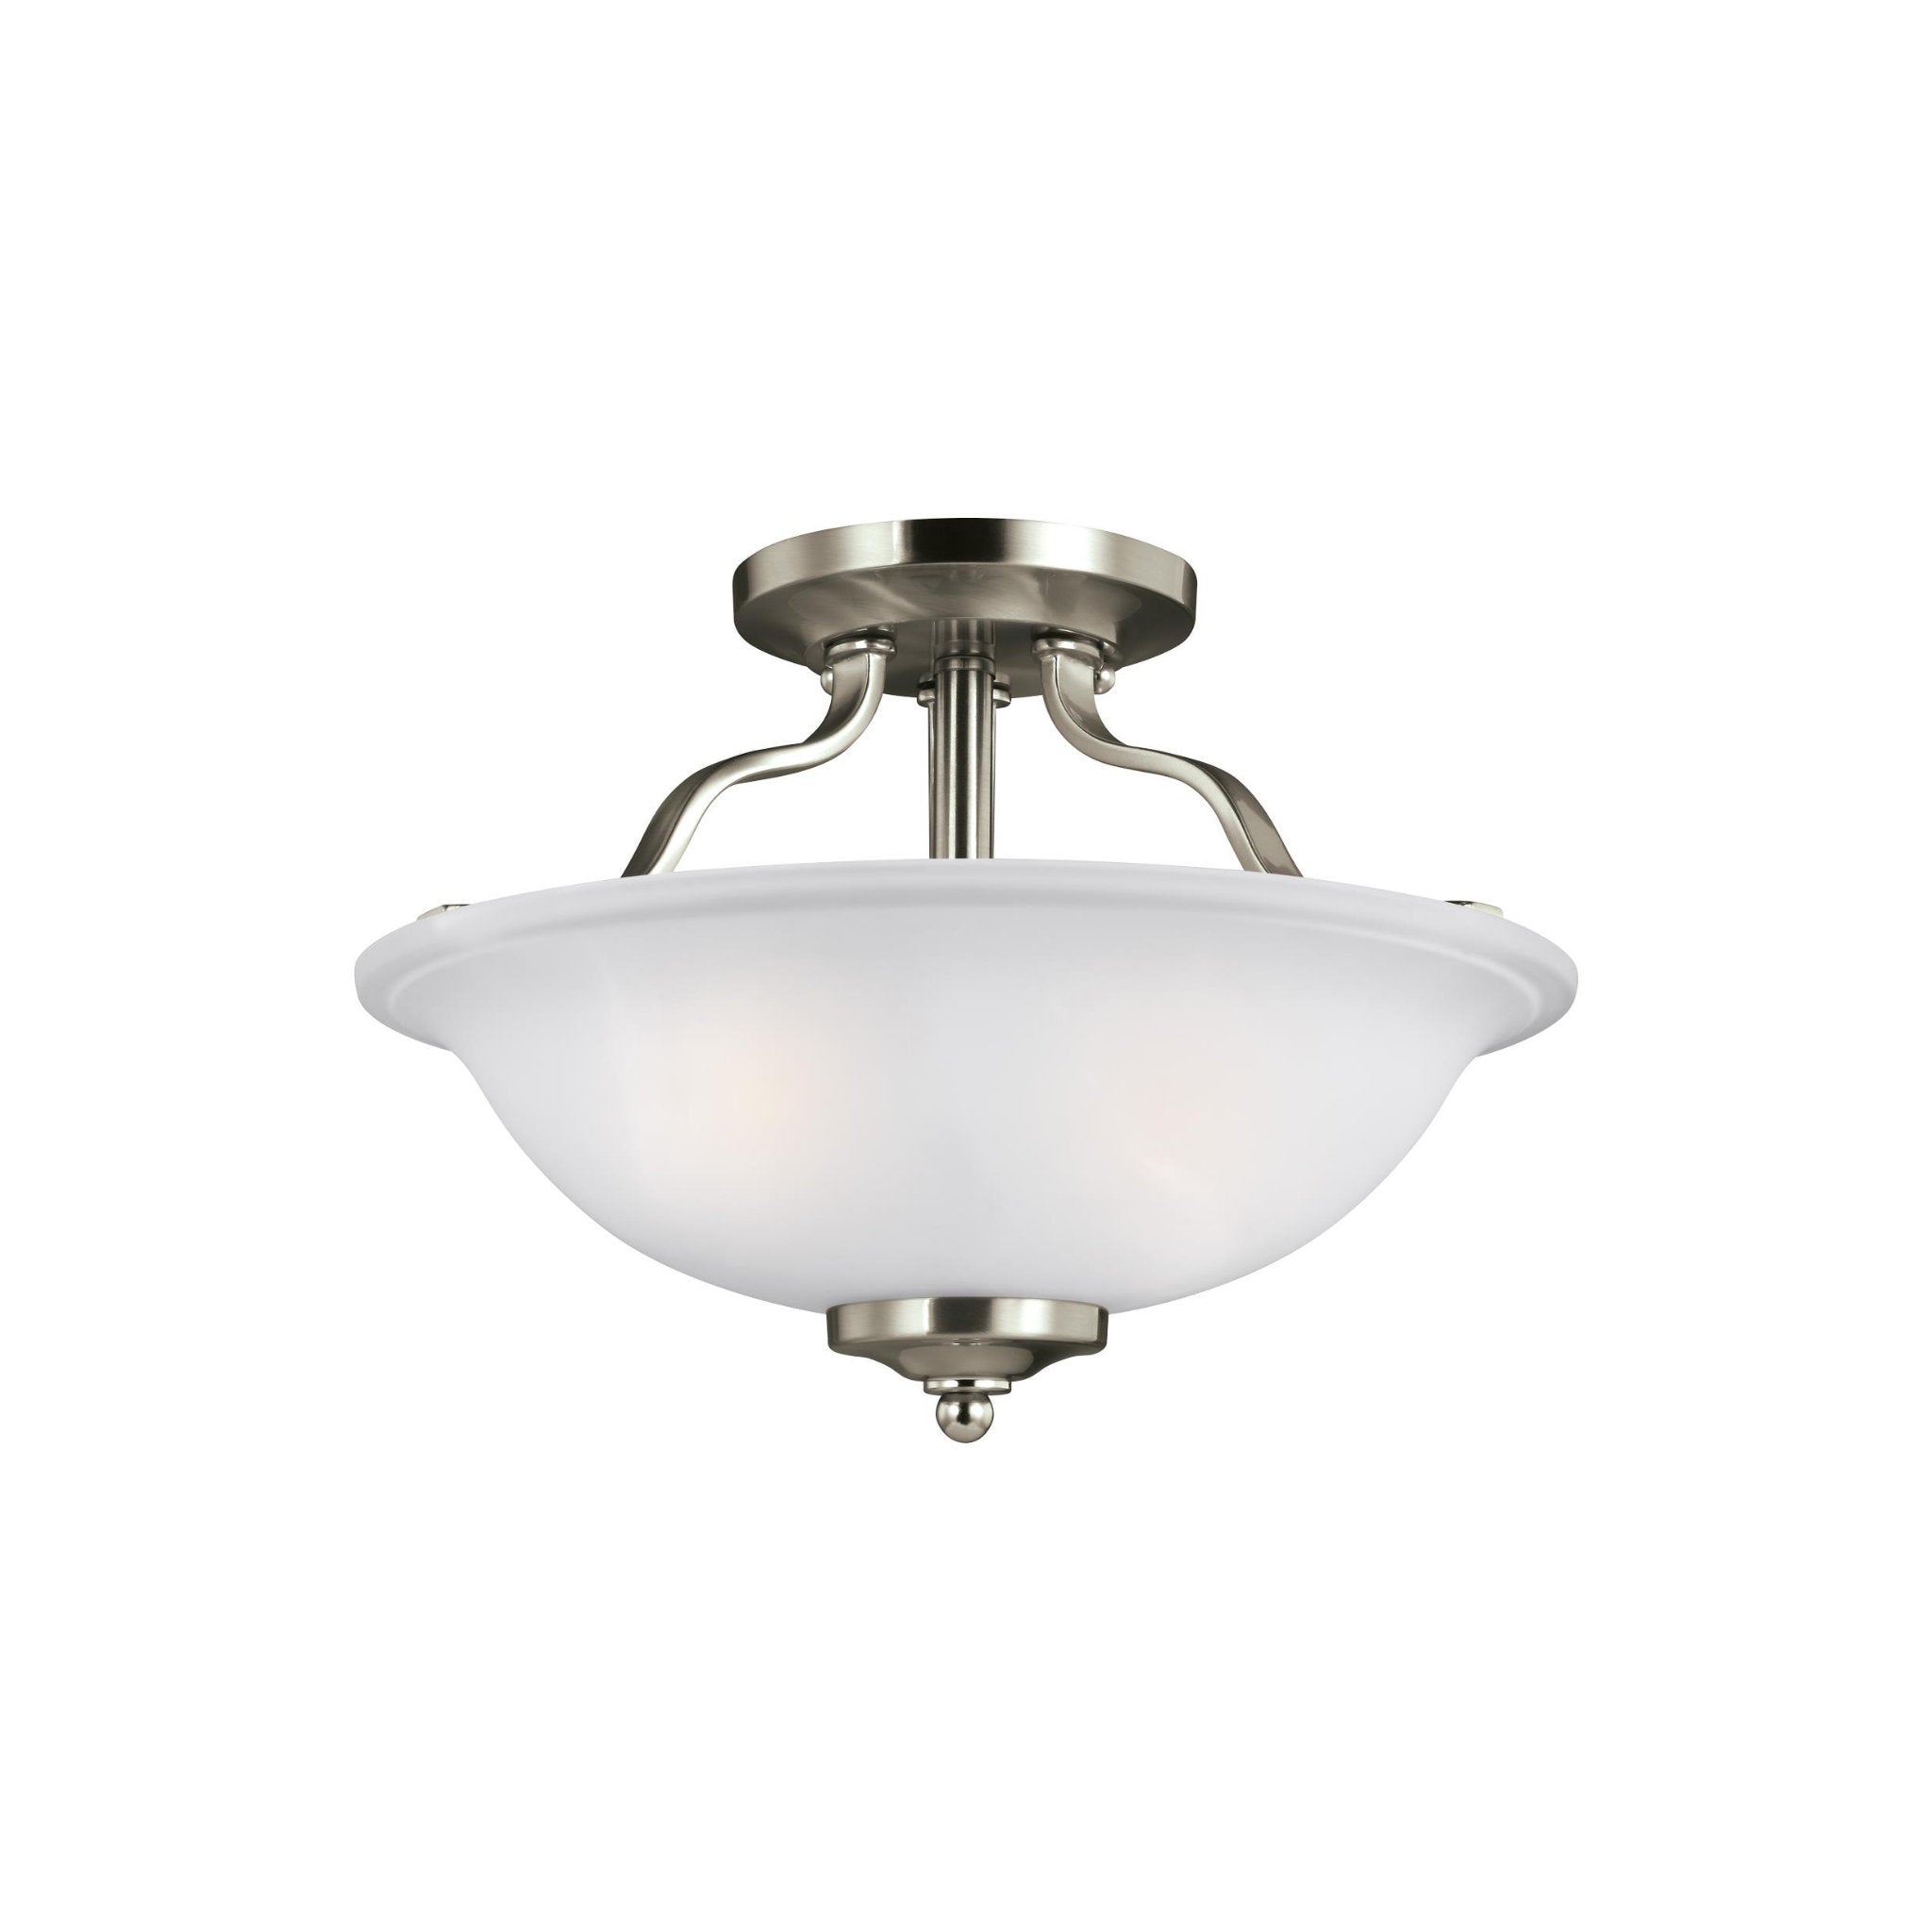 Emmons Two Light Semi-Flush LED Traditional Ceiling Fixture 8.875" Height Steel Round Satin Etched Shade in Brushed Nickel